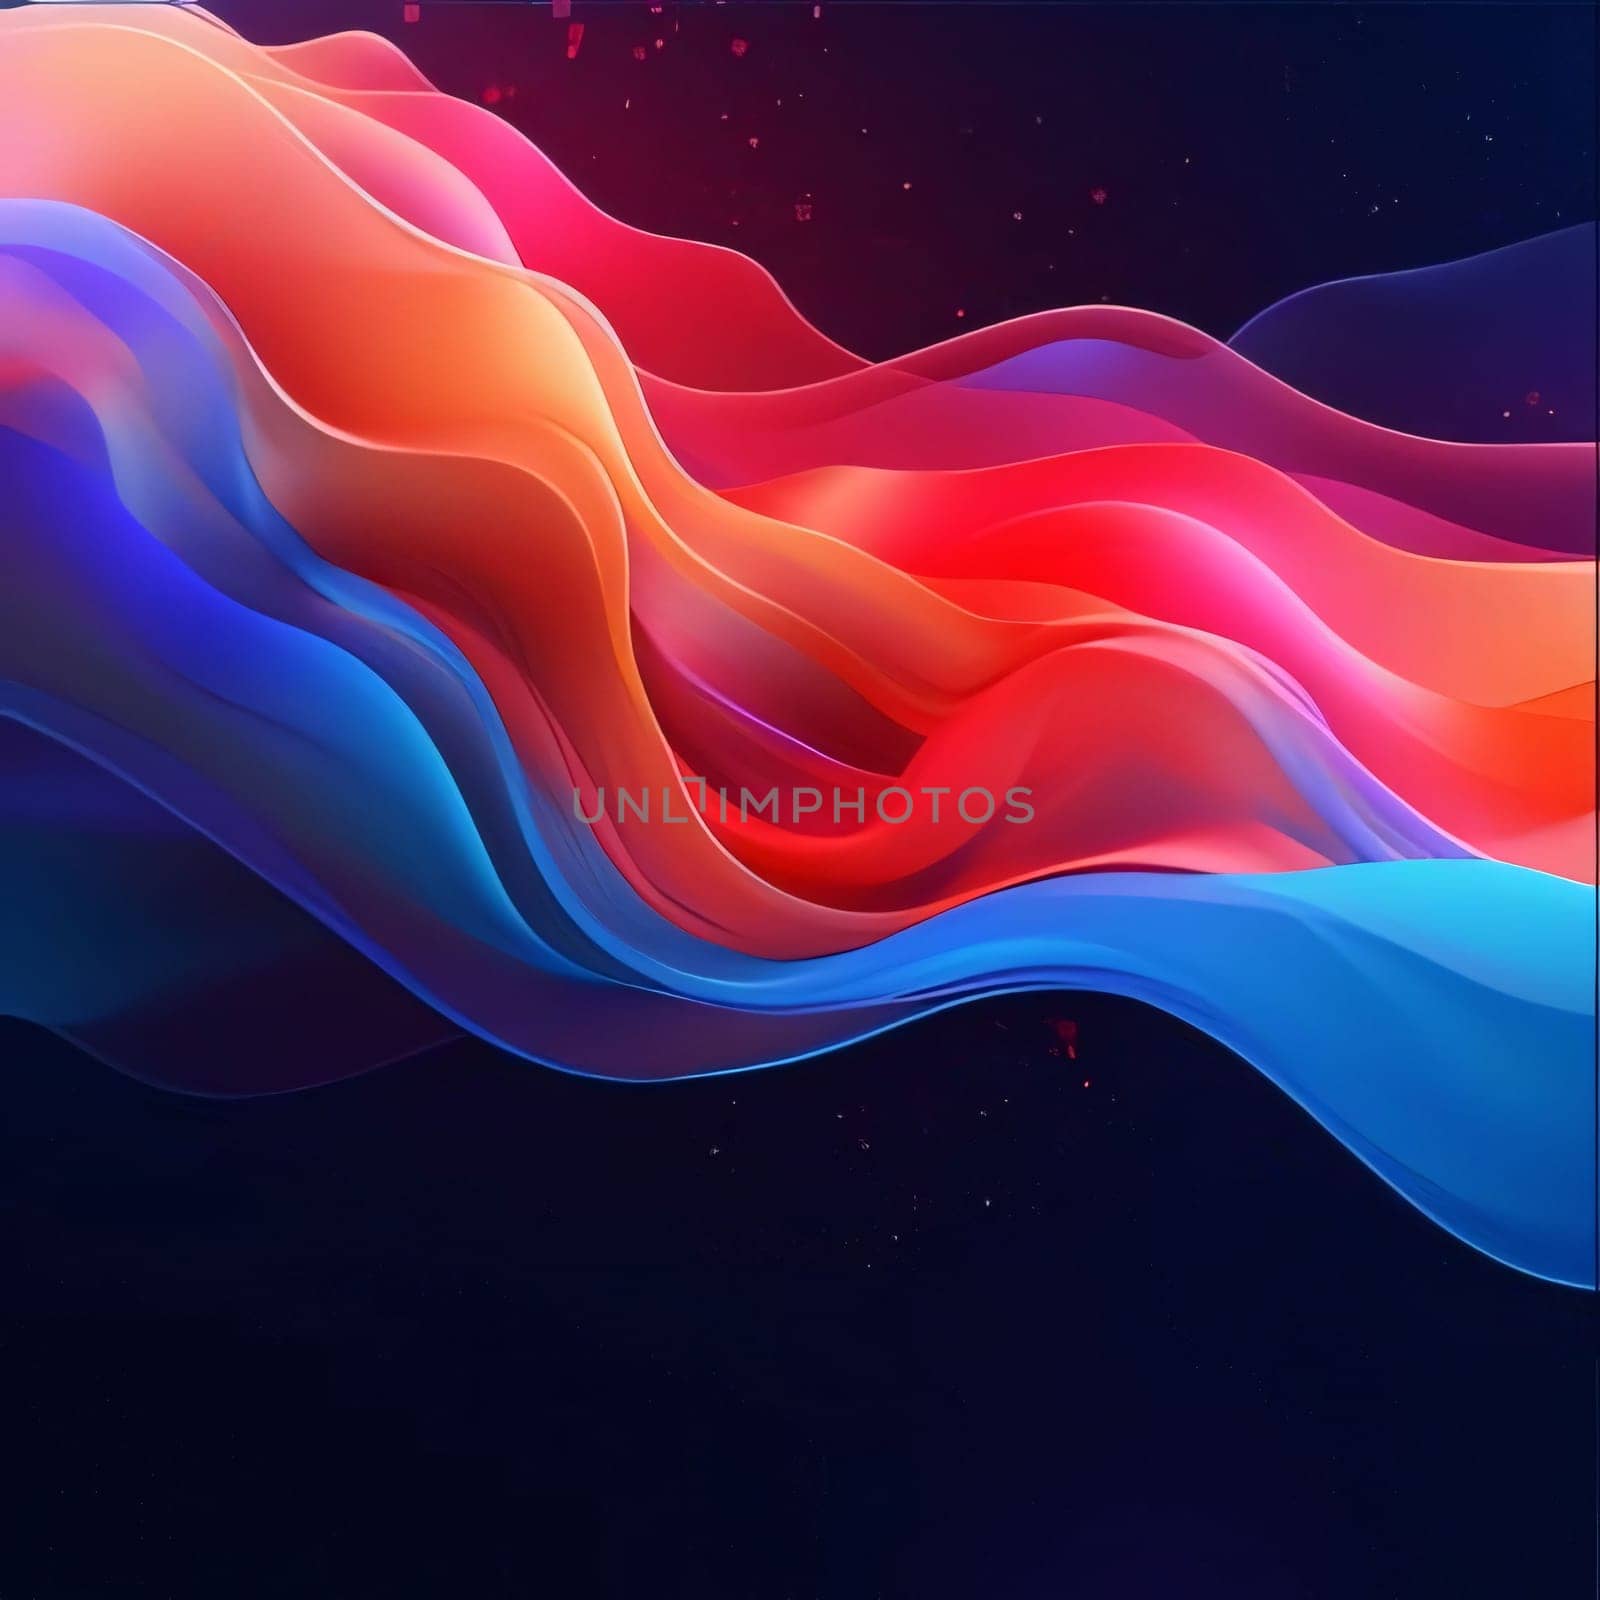 Abstract background design: abstract background with blue, red and orange wavy lines. vector illustration